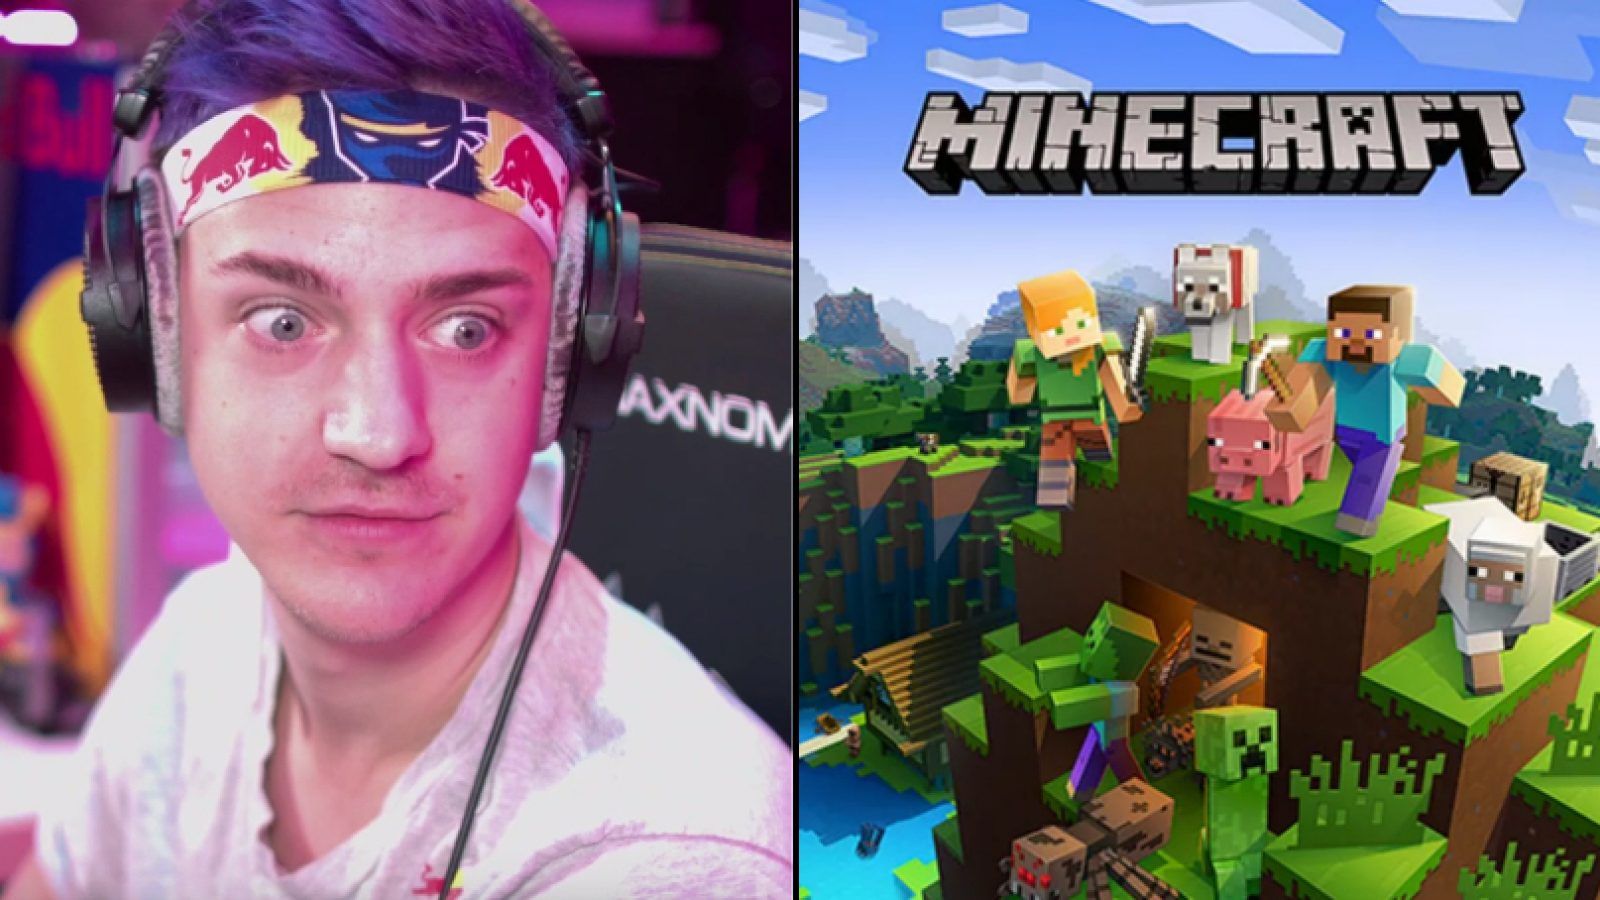 Ninja explains why he's staying on Fortnite while everyone's